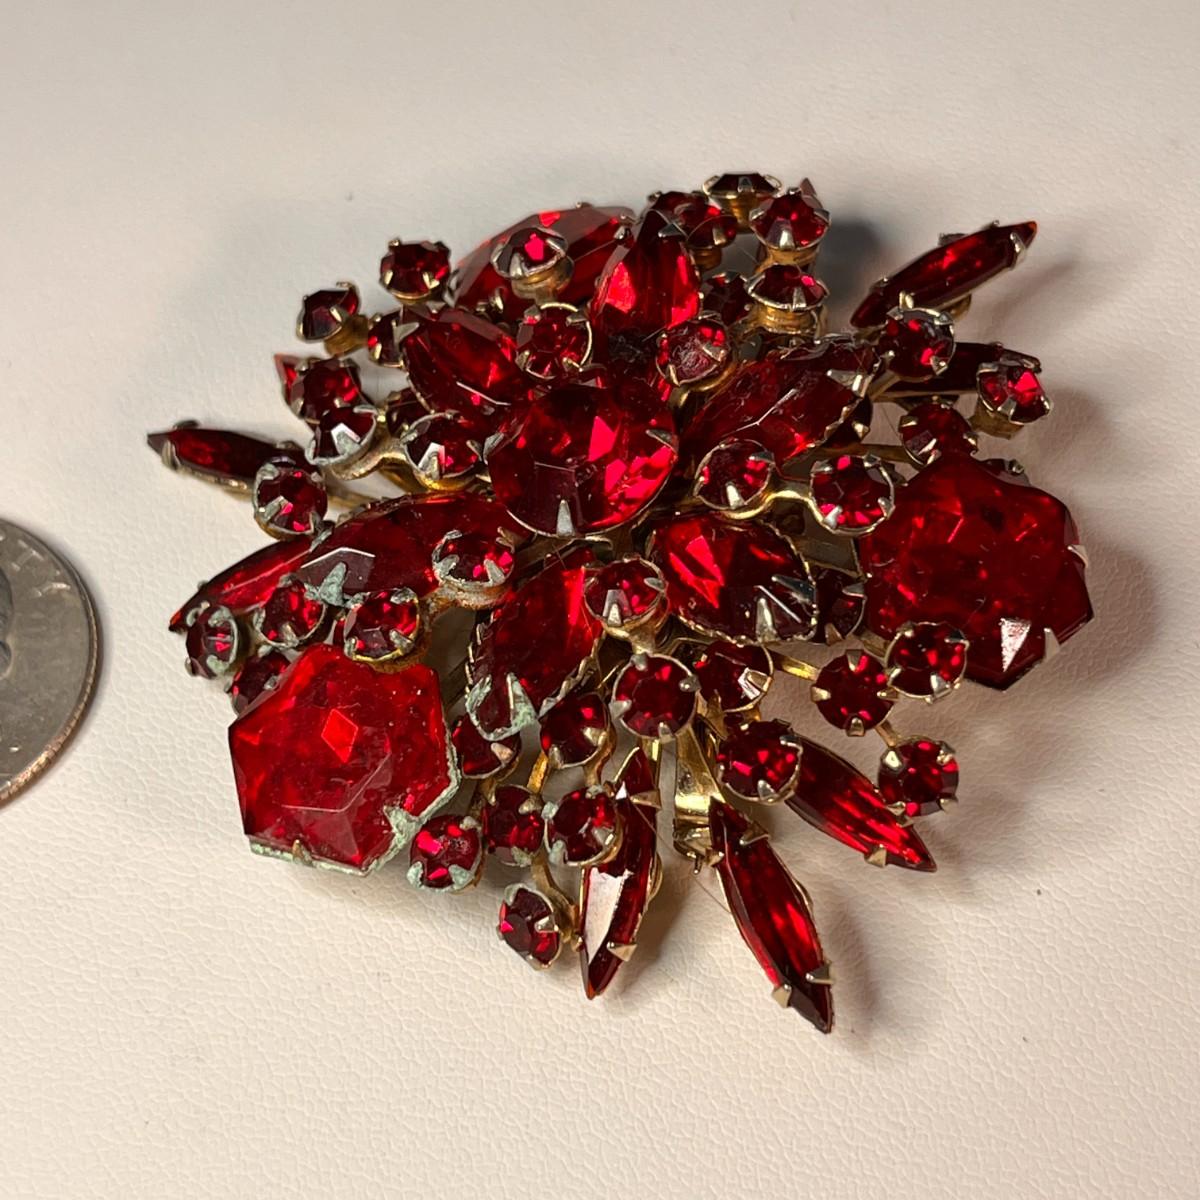 STUNNING LARGE RED RHINESTONE BROOCH BY “CATHE” | EstateSales.org